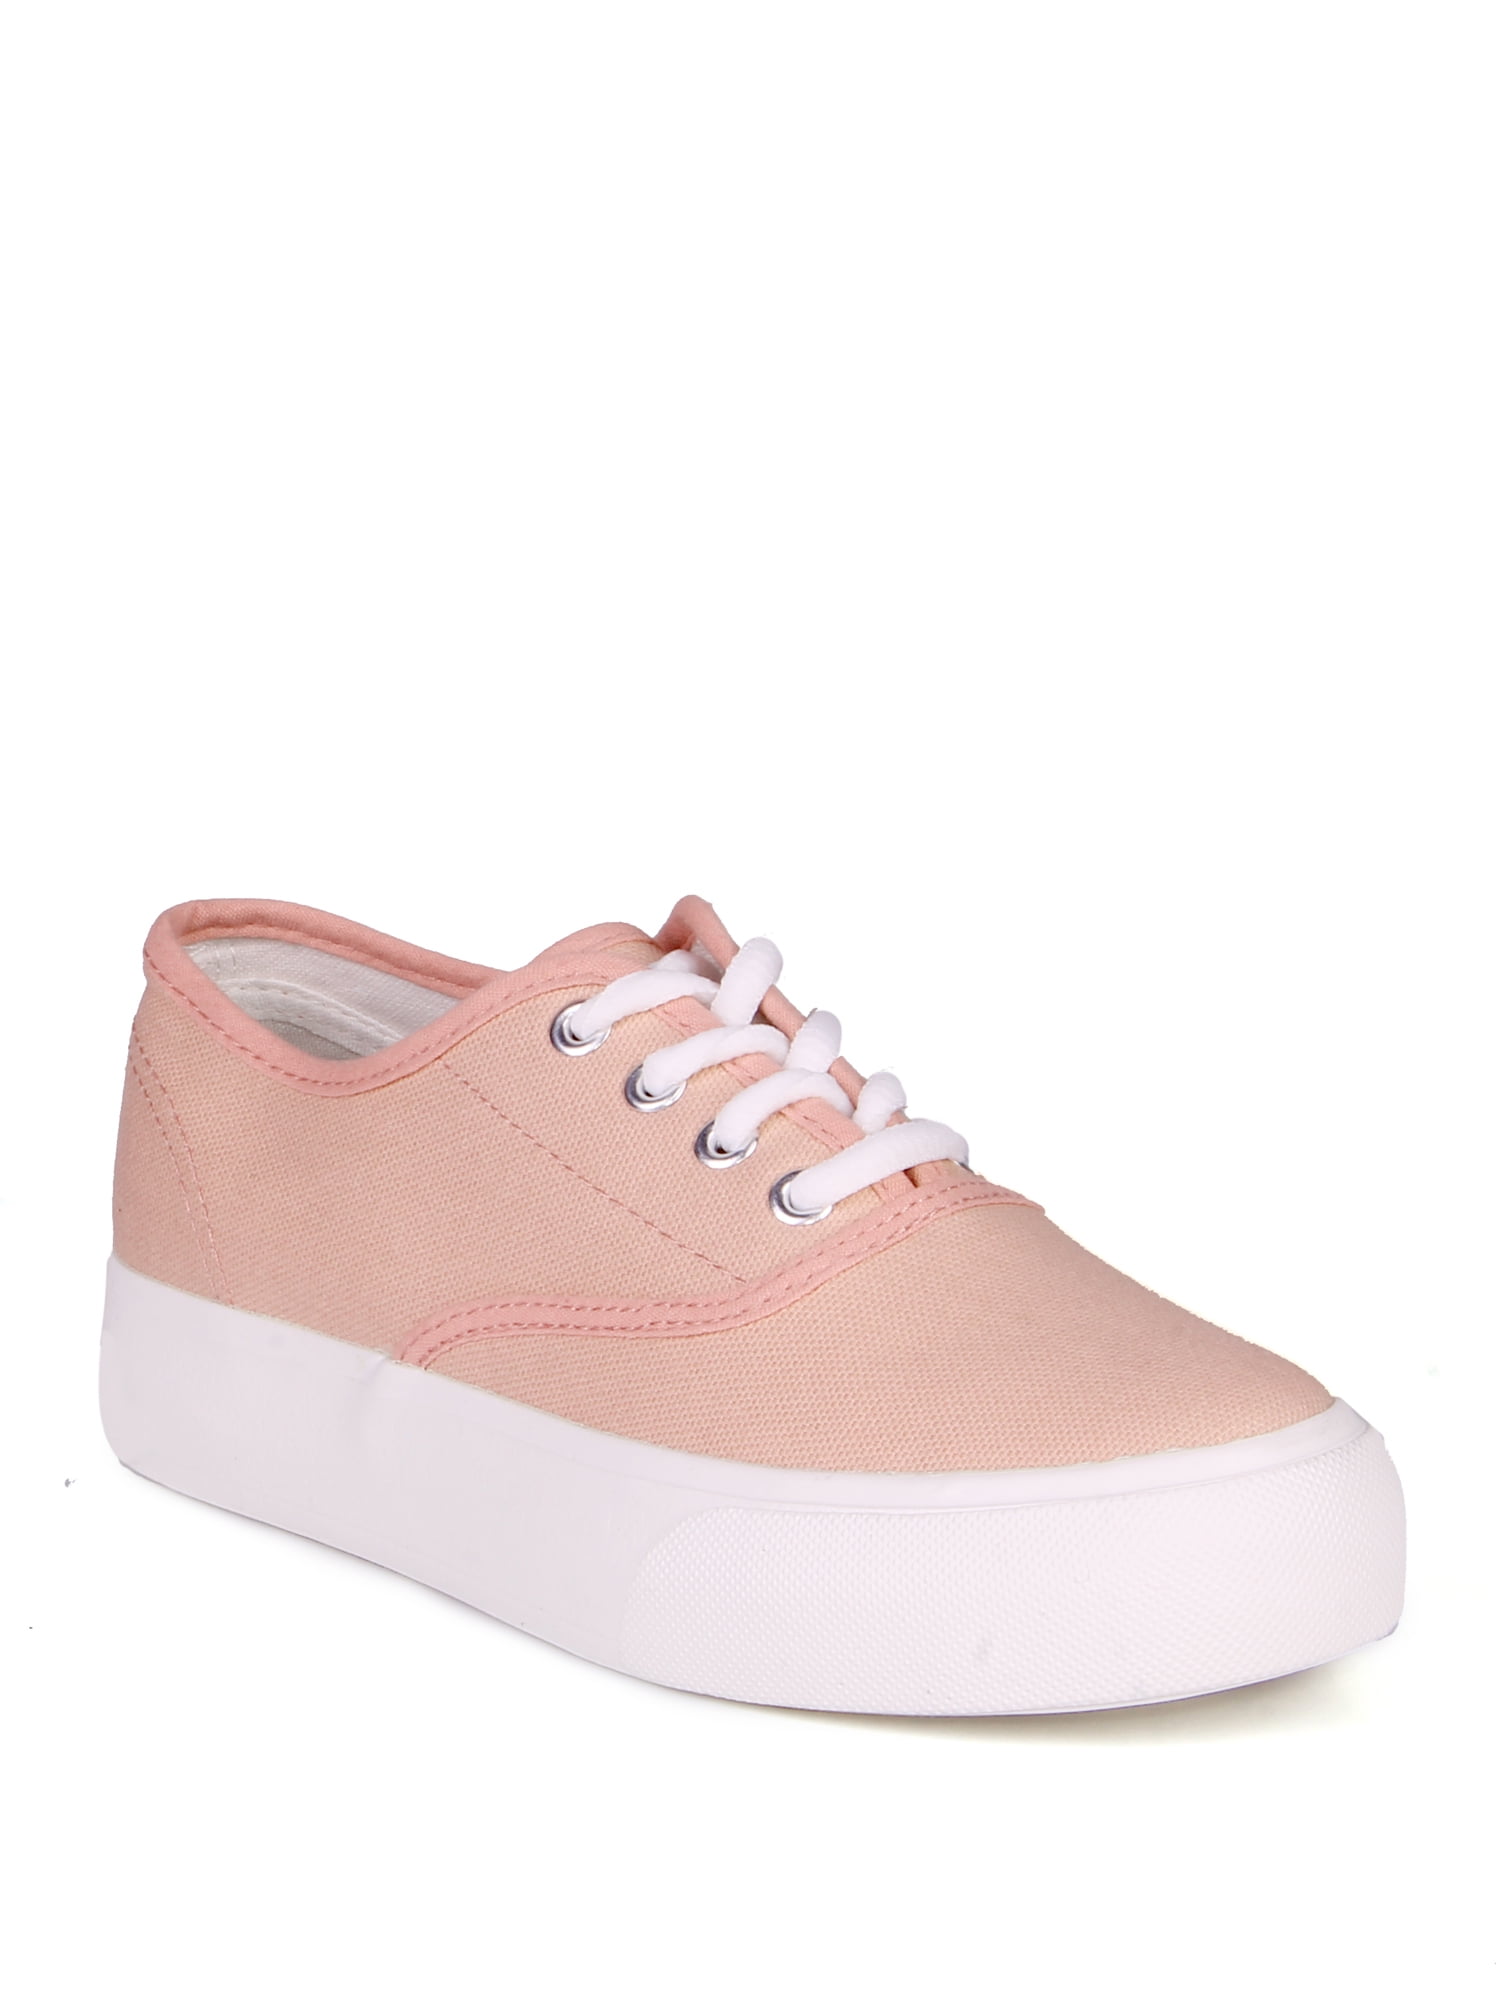 Nature Breeze Lace Up Women's Canvas Sneakers in Blush - Walmart.com